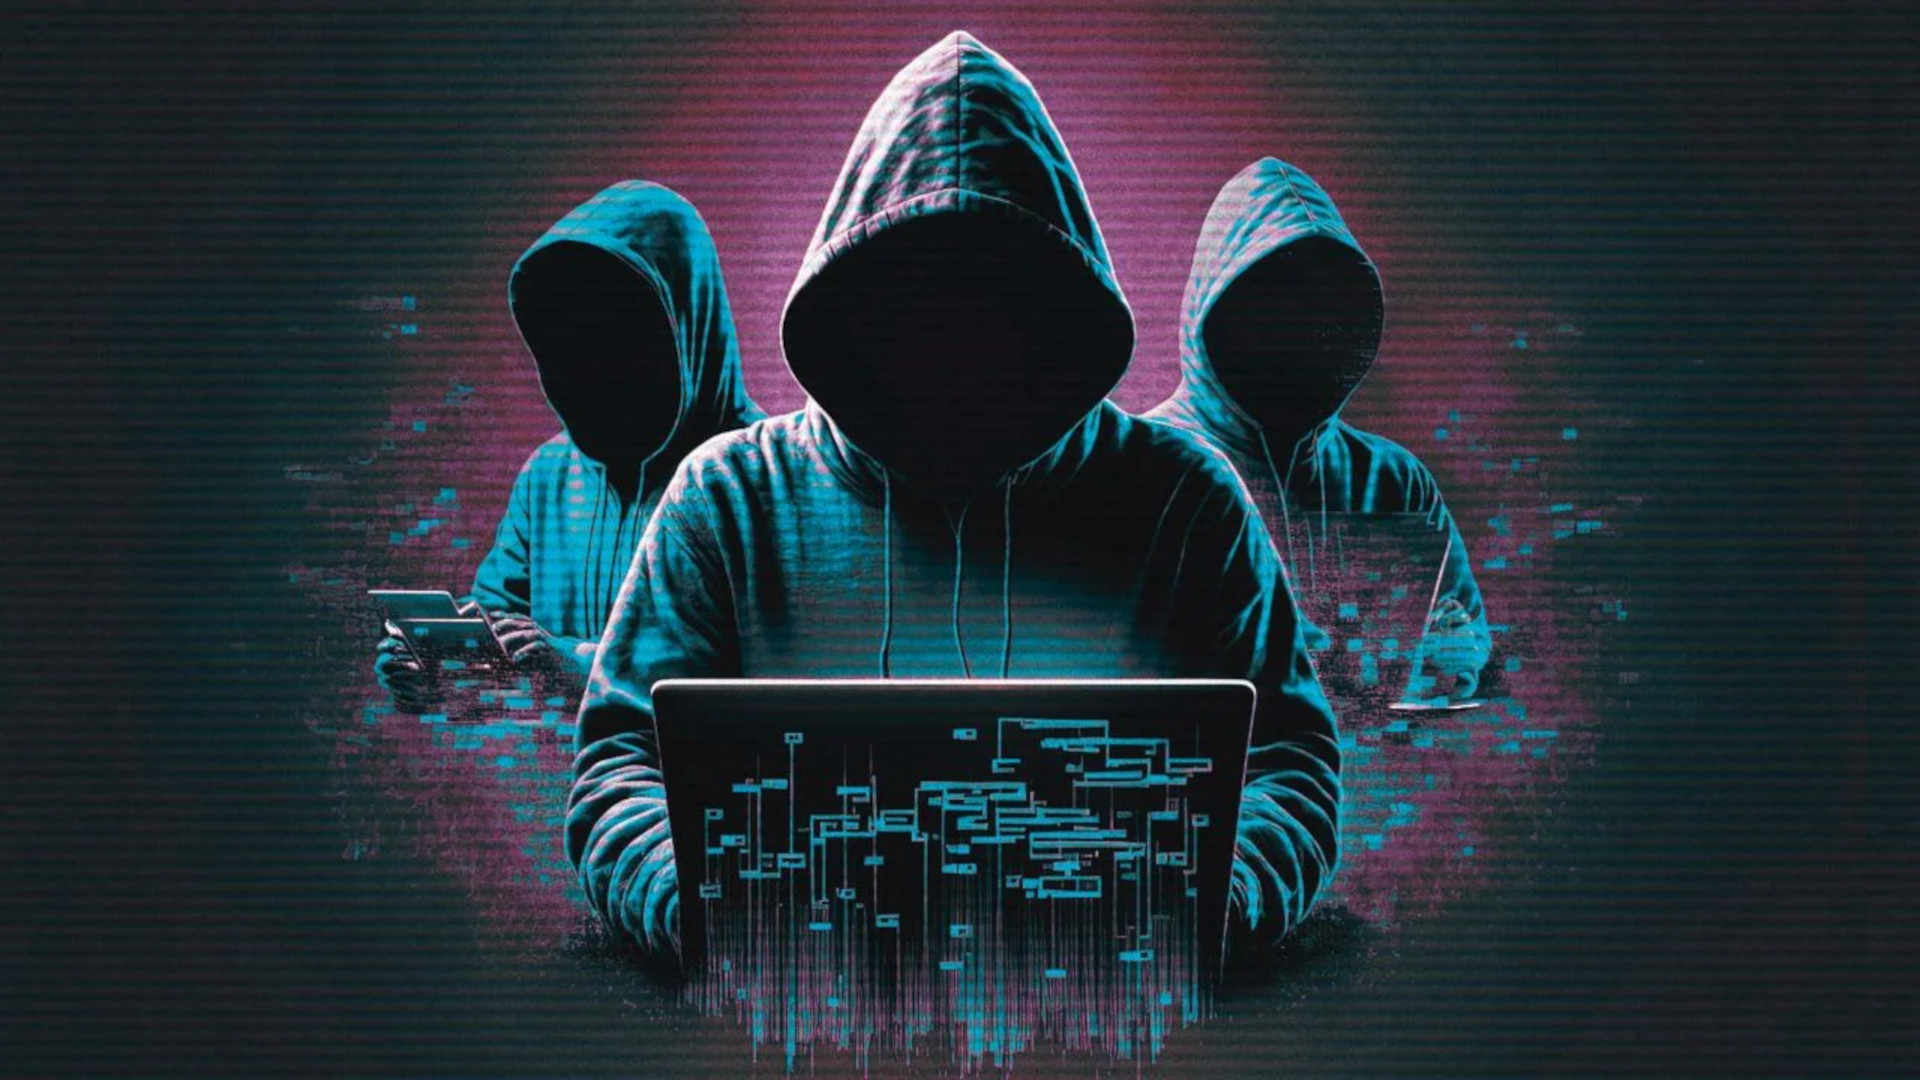 Cyber Shadows - The 7 Most Infamous Hackers in History